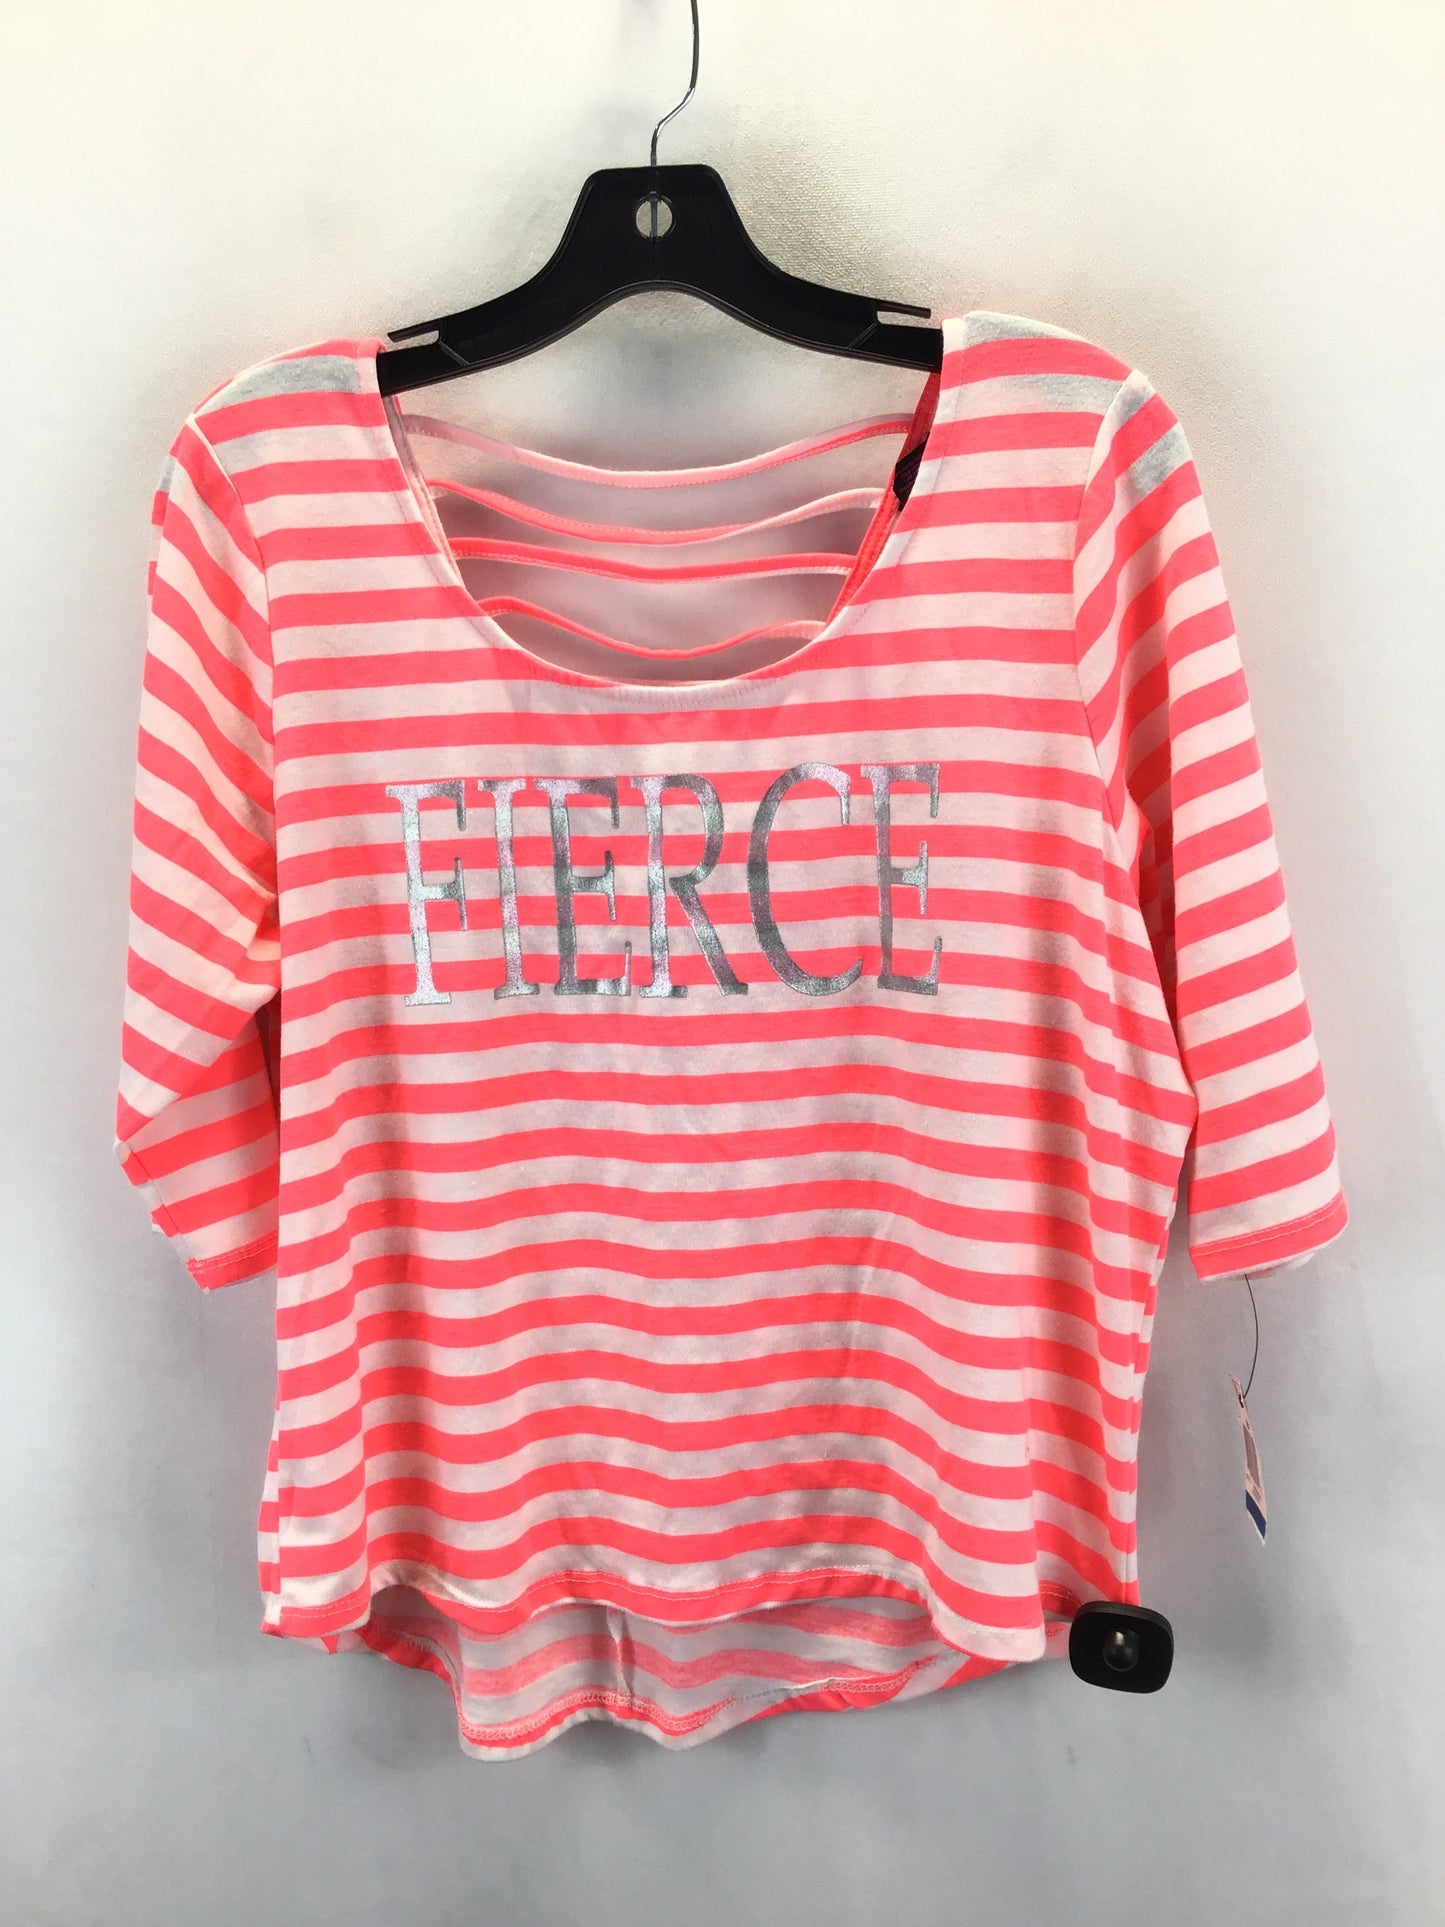 Pink & White Top 3/4 Sleeve Material Girl, Size Xl